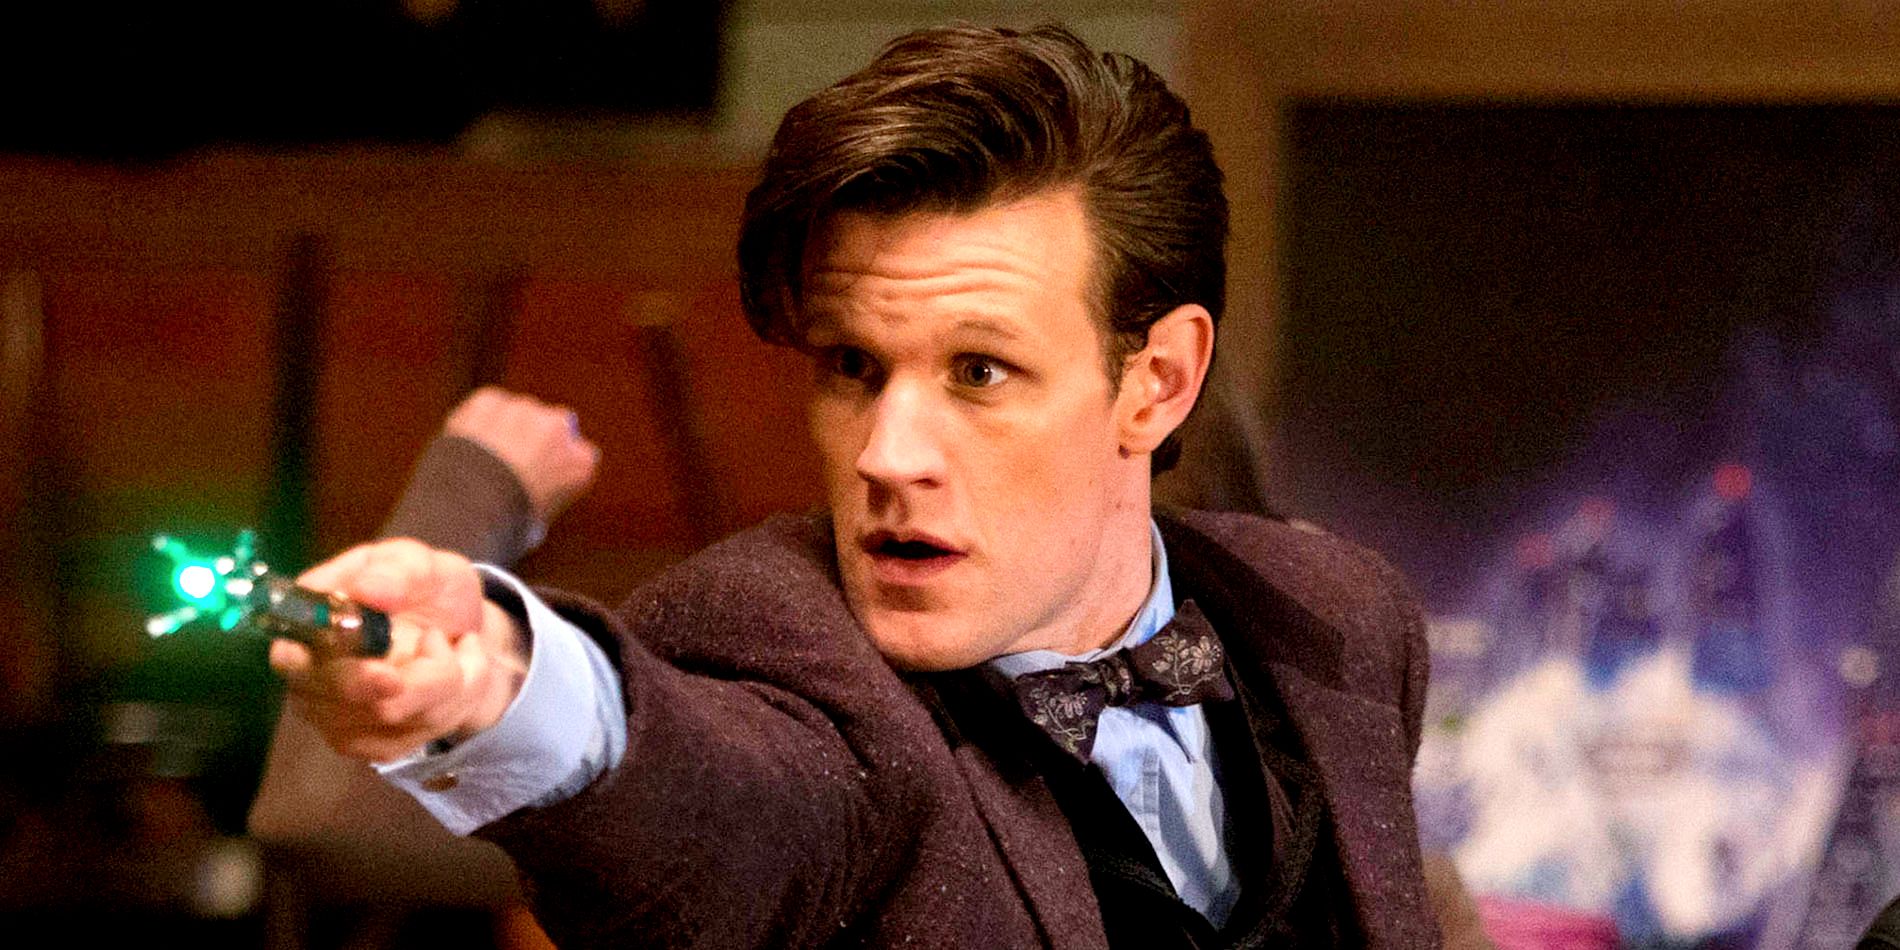 The Eleventh Doctor pointing a device in Doctor Who.